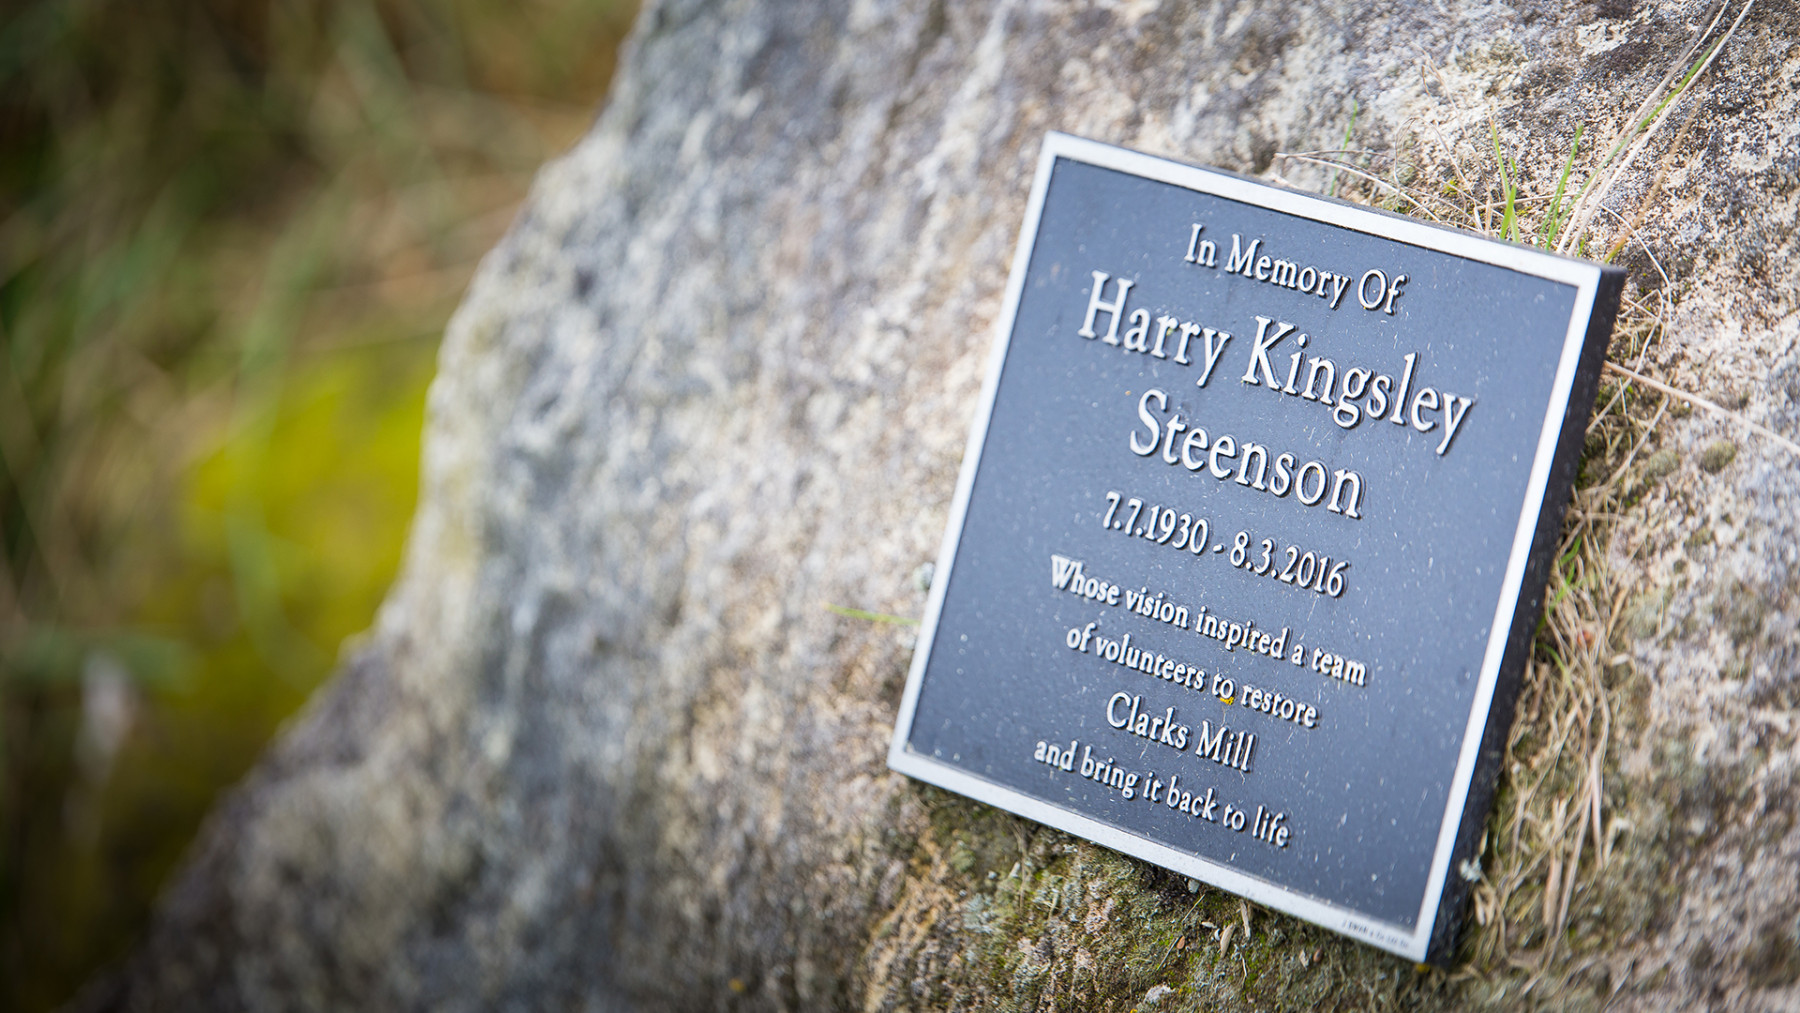 Memorial plaque for Harry Steenson reads 'In memory of Harry Kingsley Steenson 7.07.1930 - 8.03.2016 whose vision inspired a room of volunteers to restore Clarks Mill and bring it back to life'.